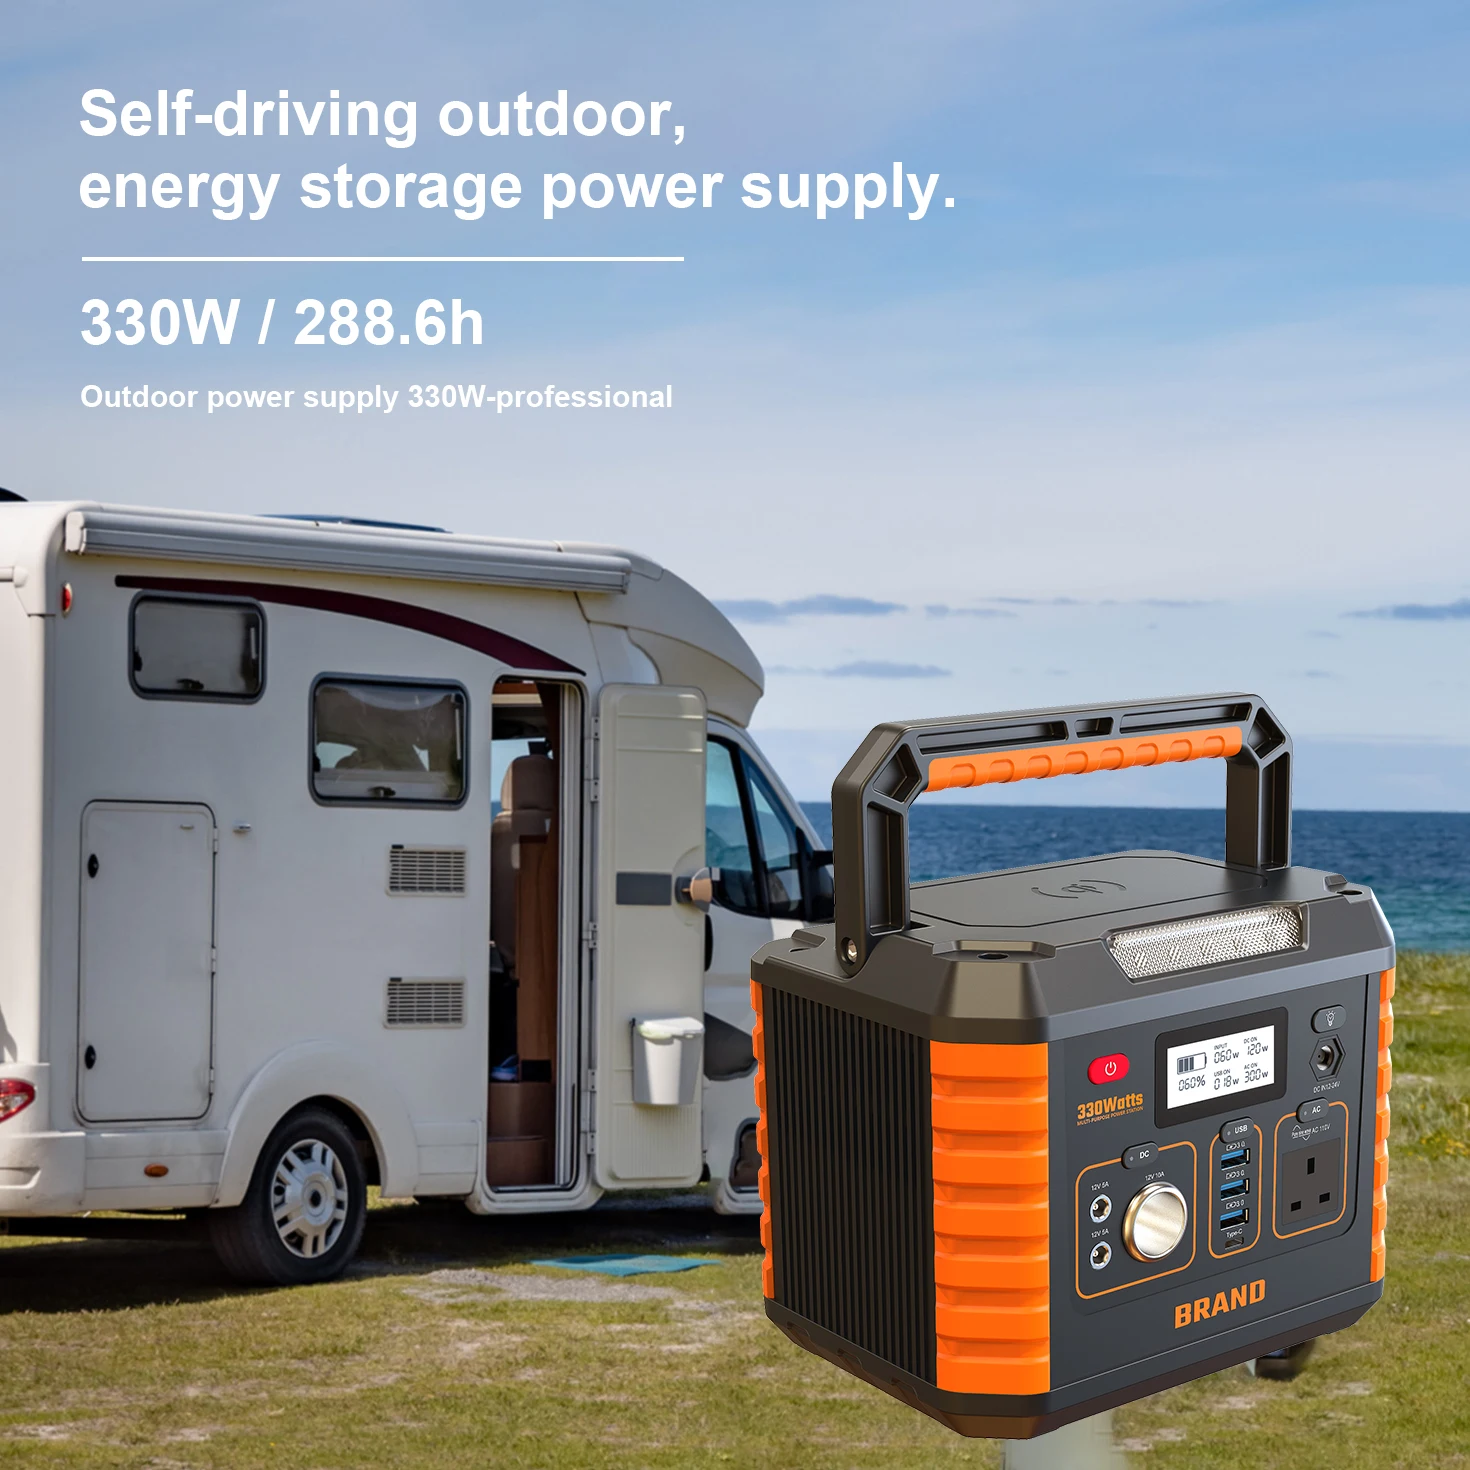 portable power station 500w 1000W ac dc portable power bank ac power station 110v with pd 60w QC 3.0 Self-driving camping